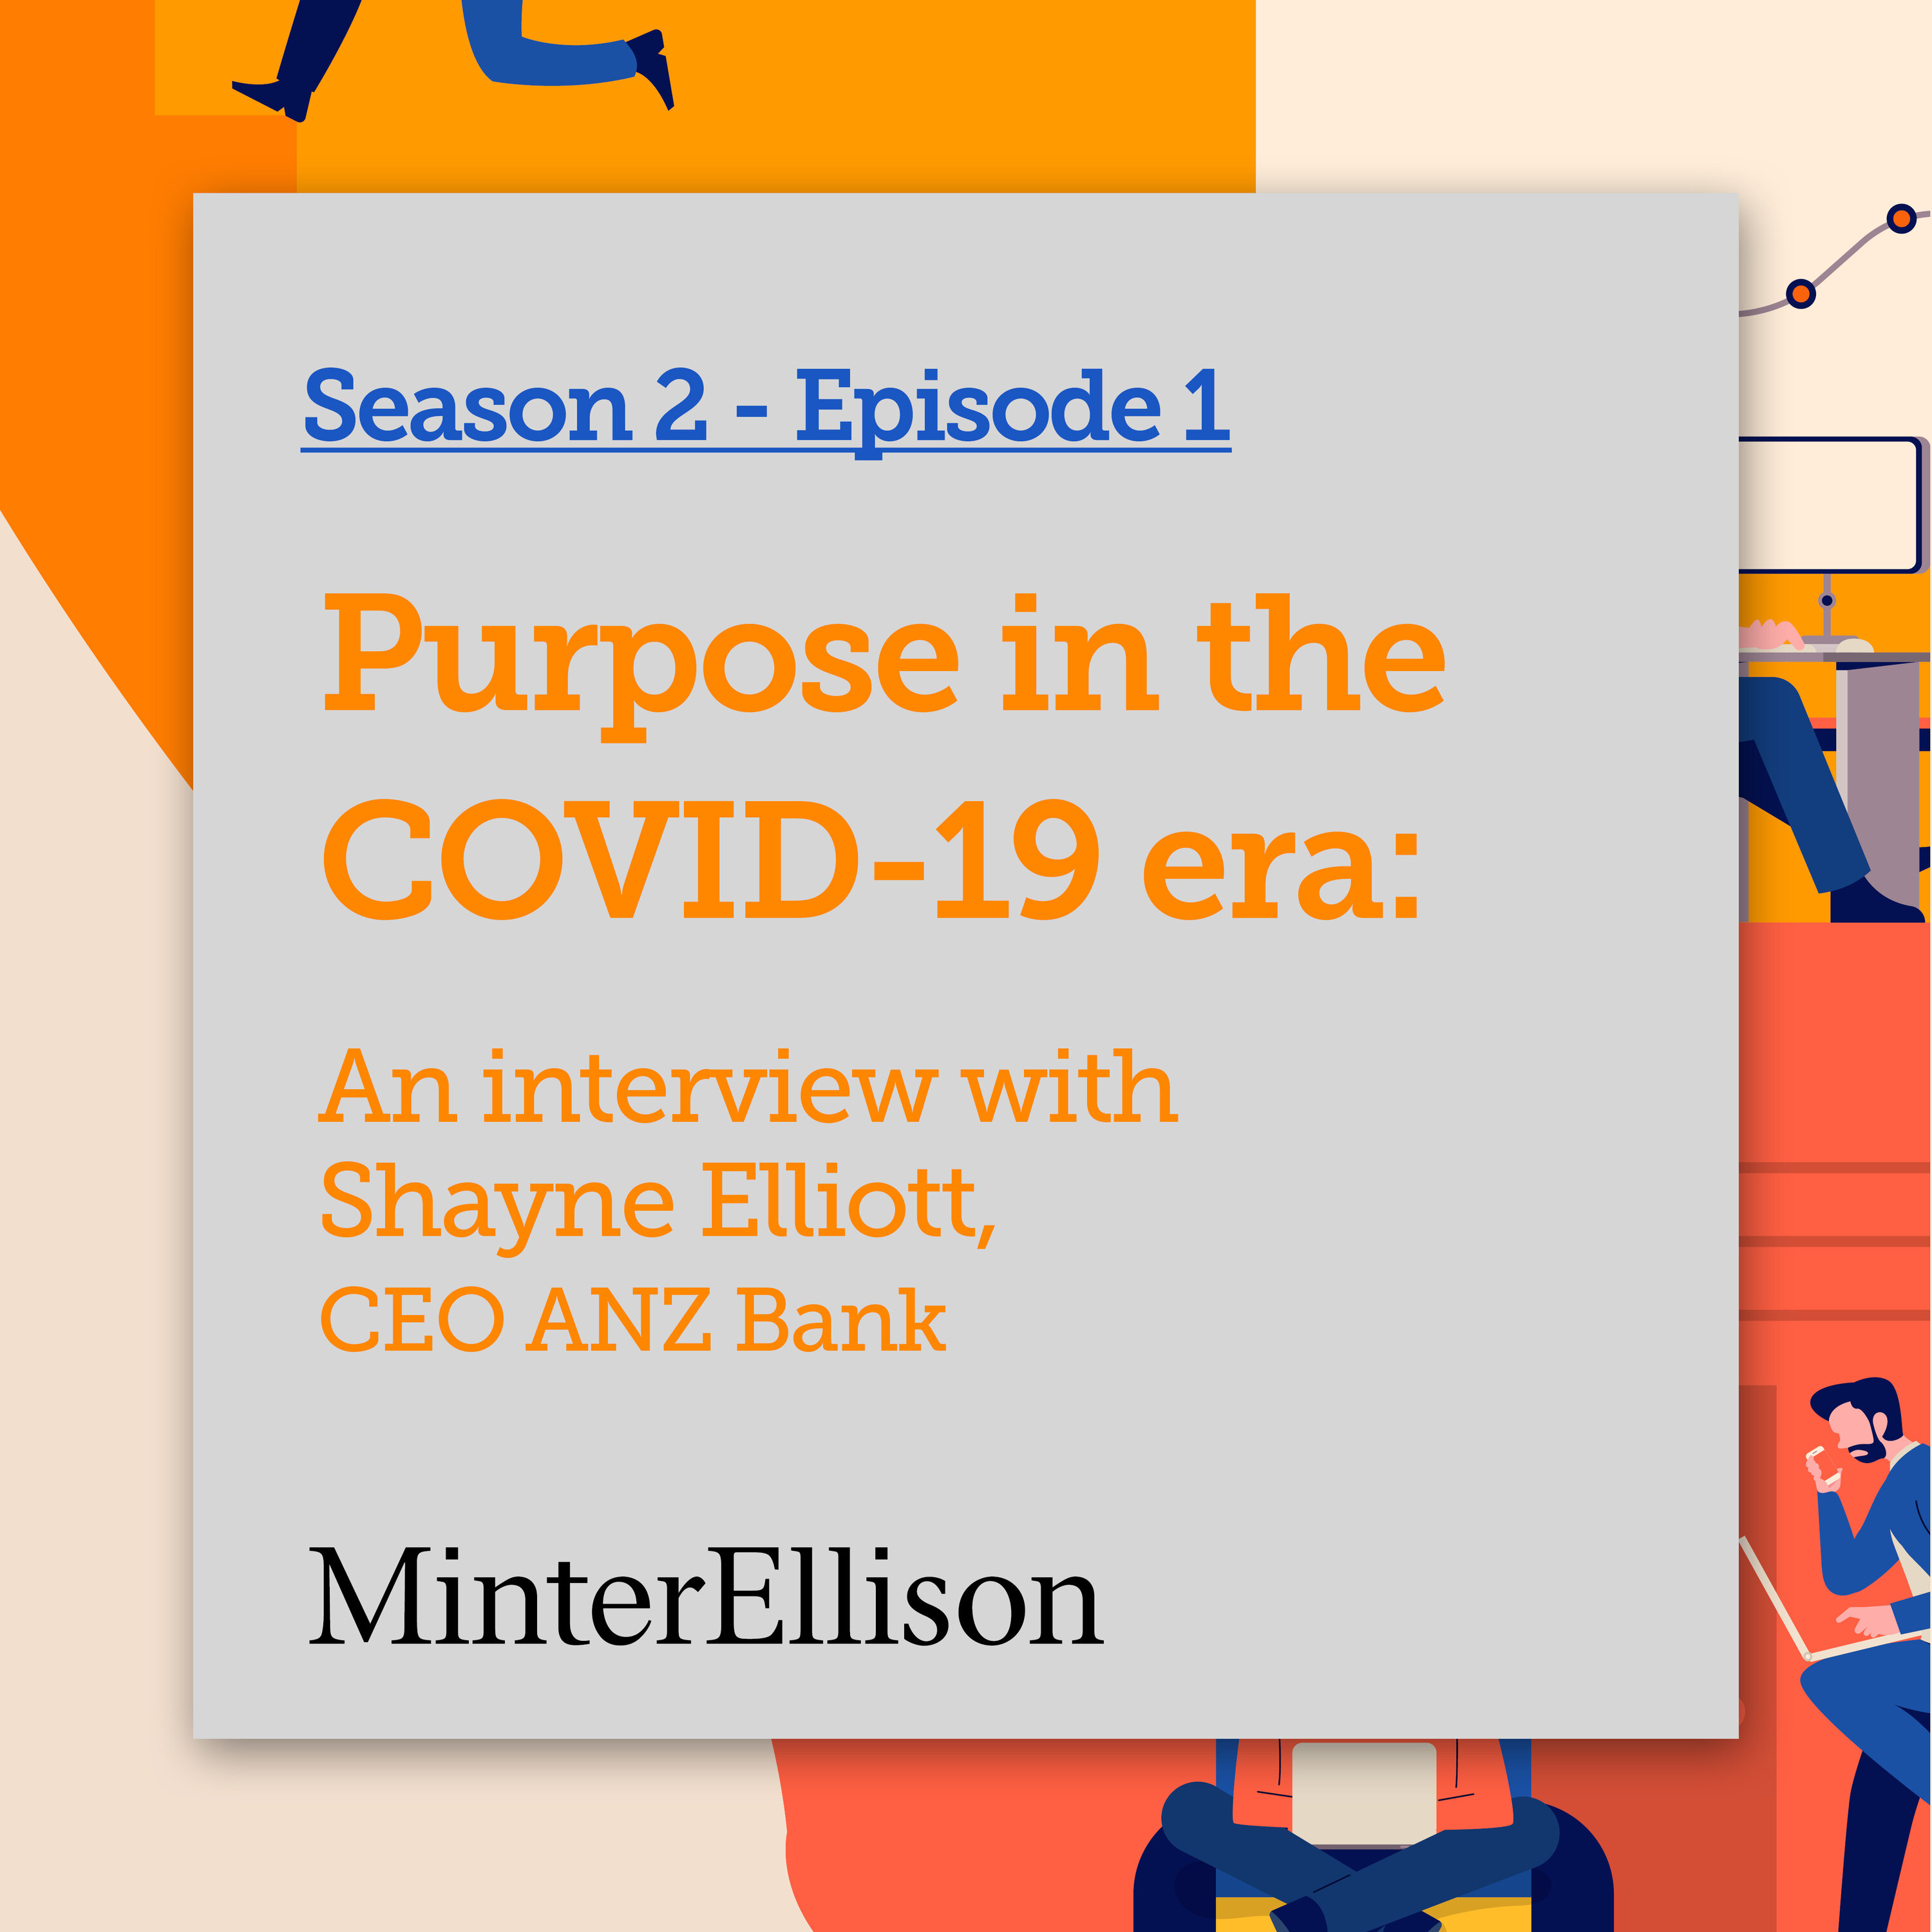 Purpose in the COVID-19 era: An interview with ANZ Bank CEO, Shayne Elliott